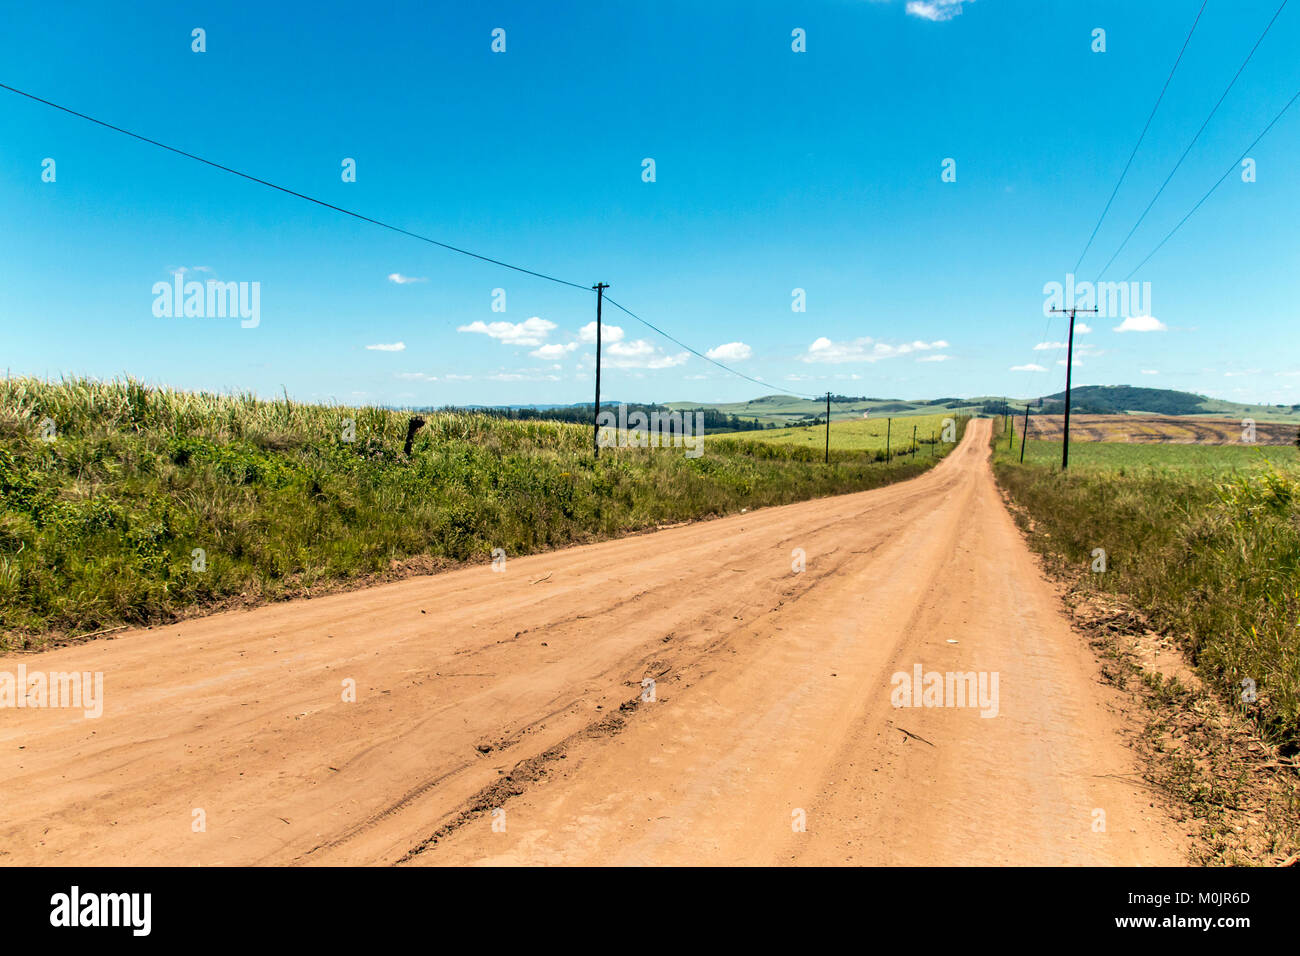 Dirt road leading through green sugar cane plantations against blue sky in Eshowe, South Africa Stock Photo